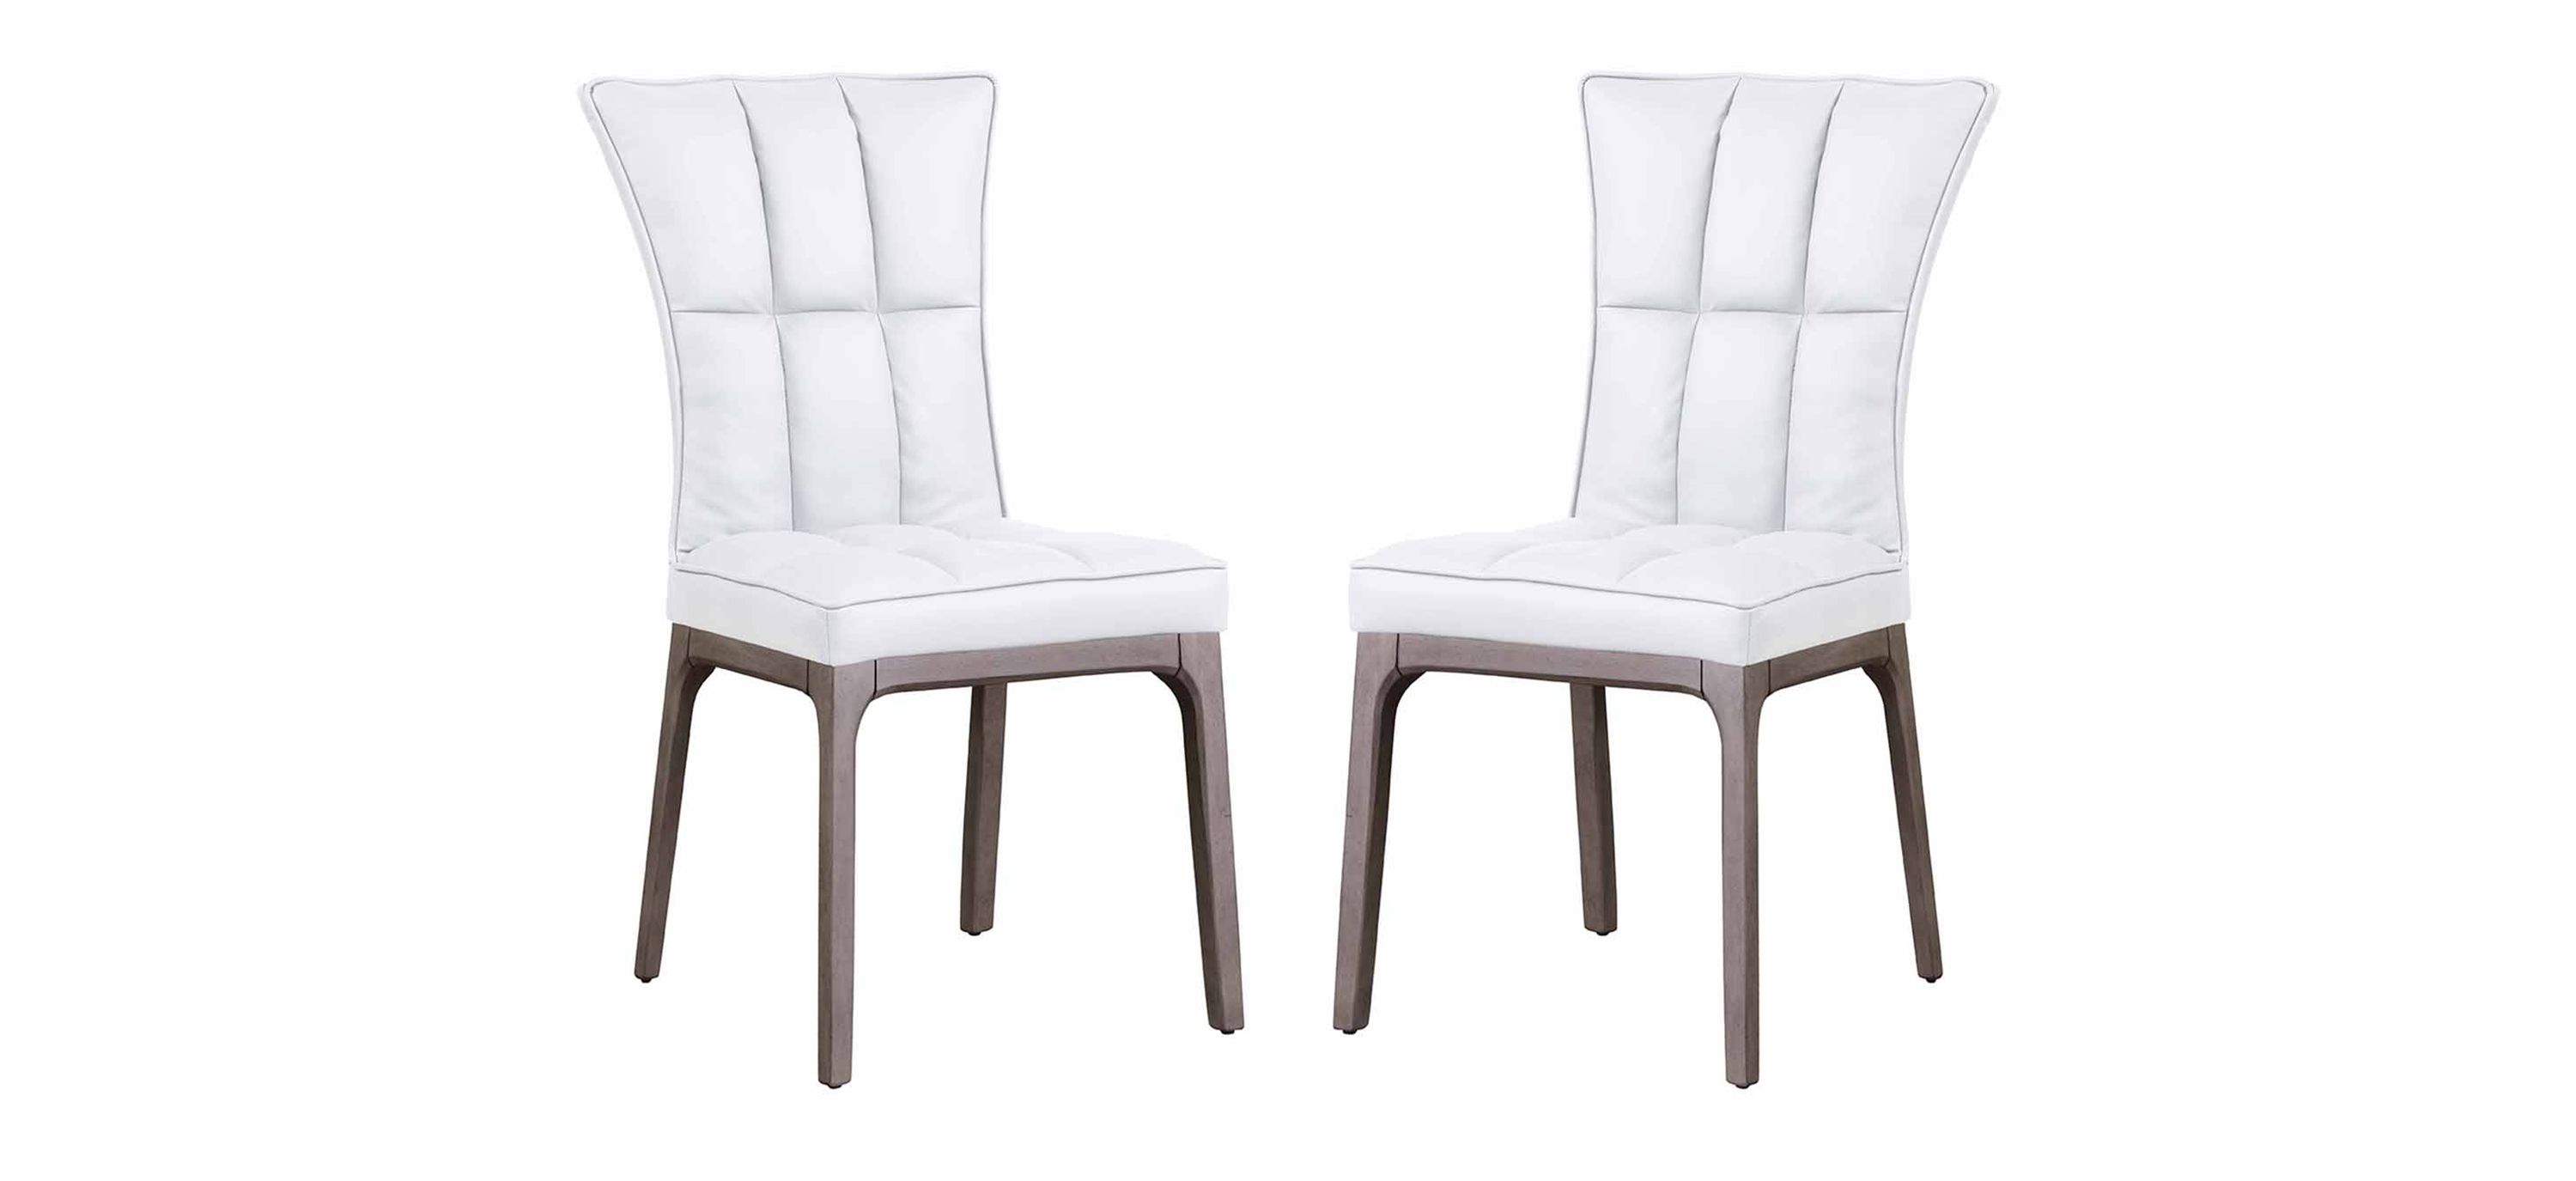 Peggie Dining Chair - Set of 2